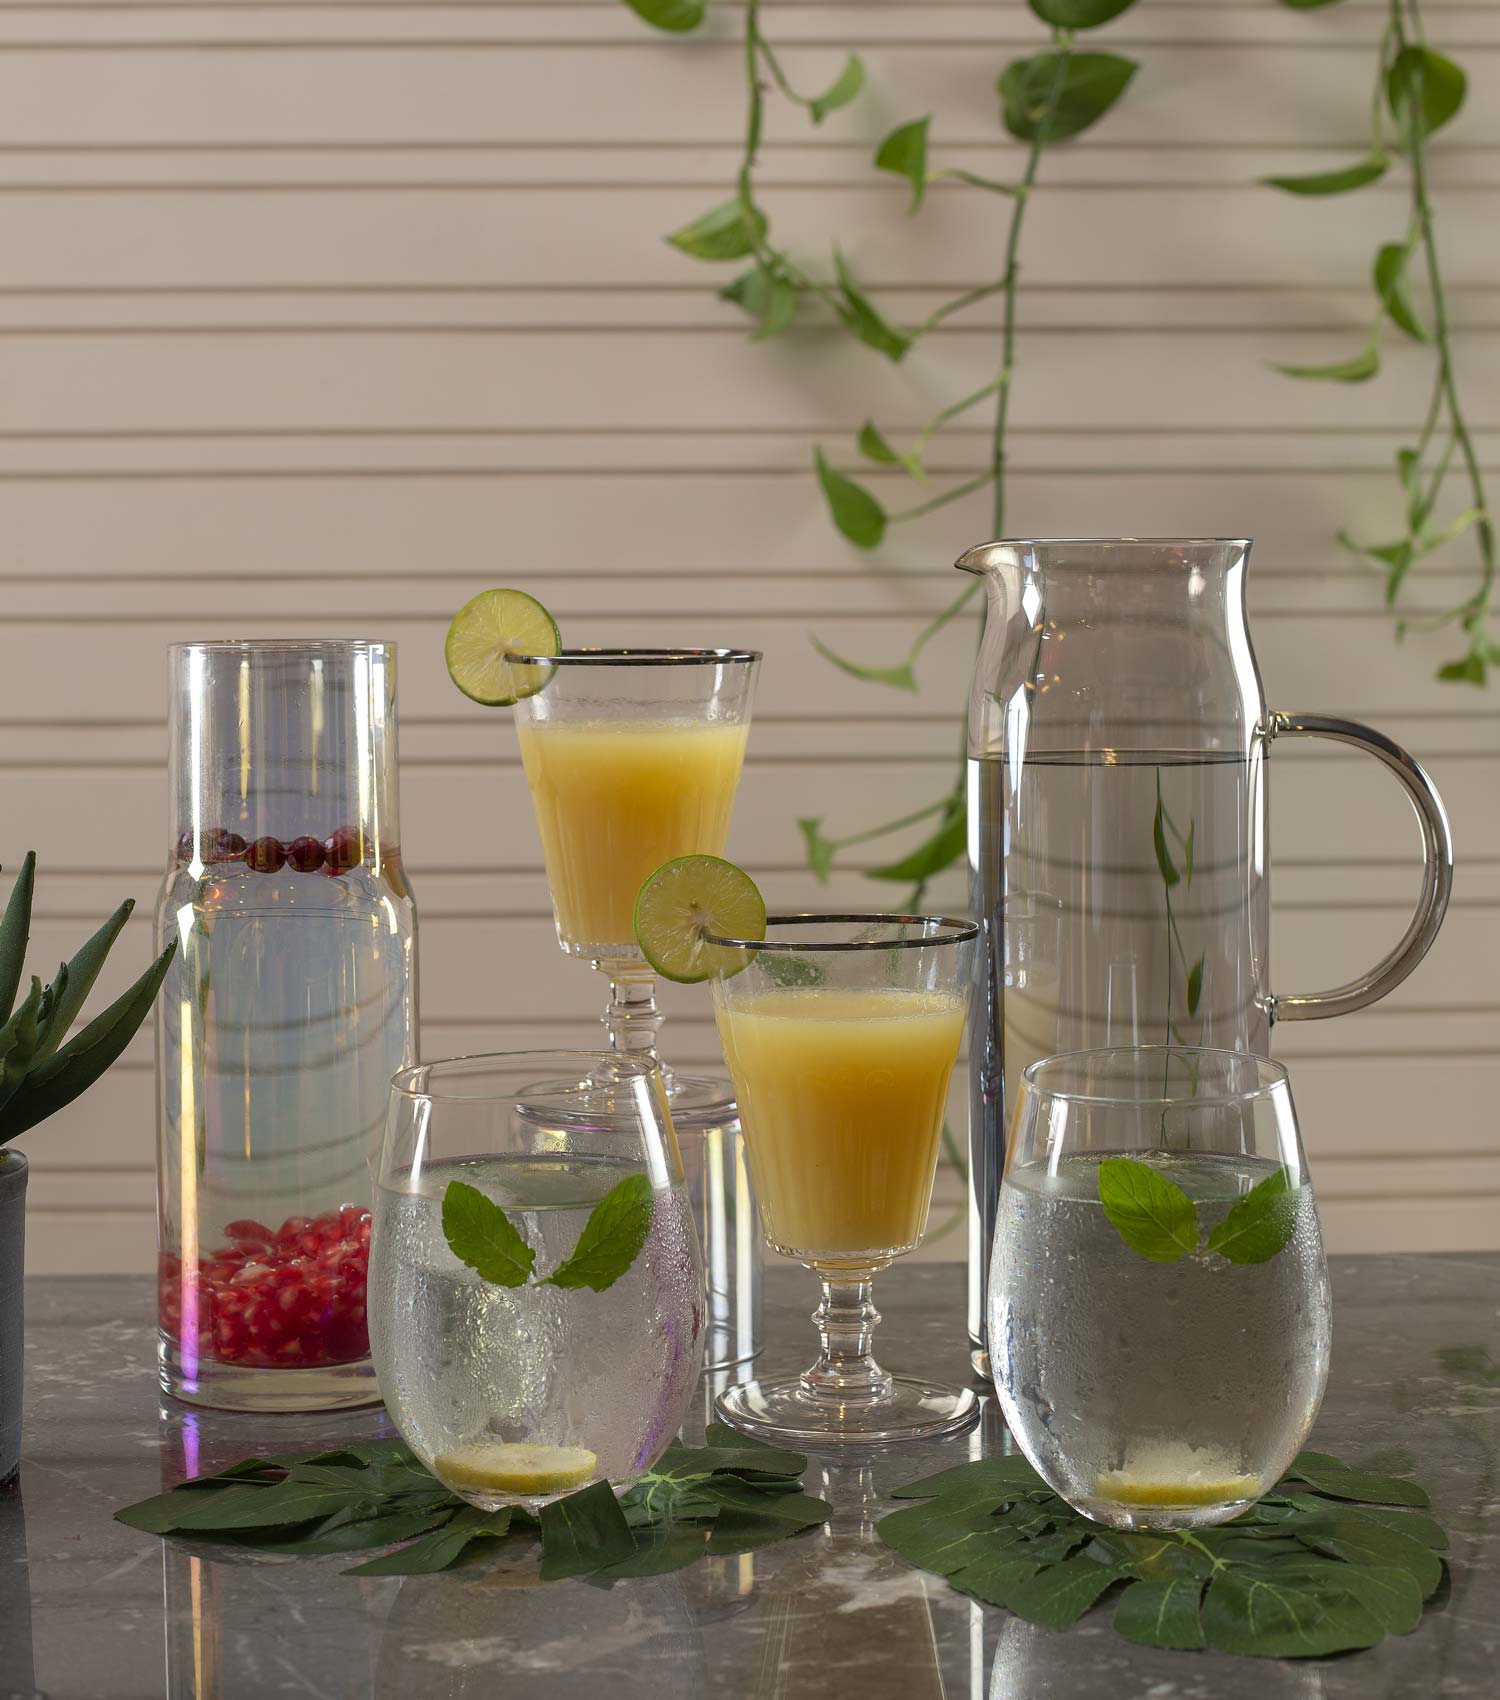 Imperial Tumblers Set of 6